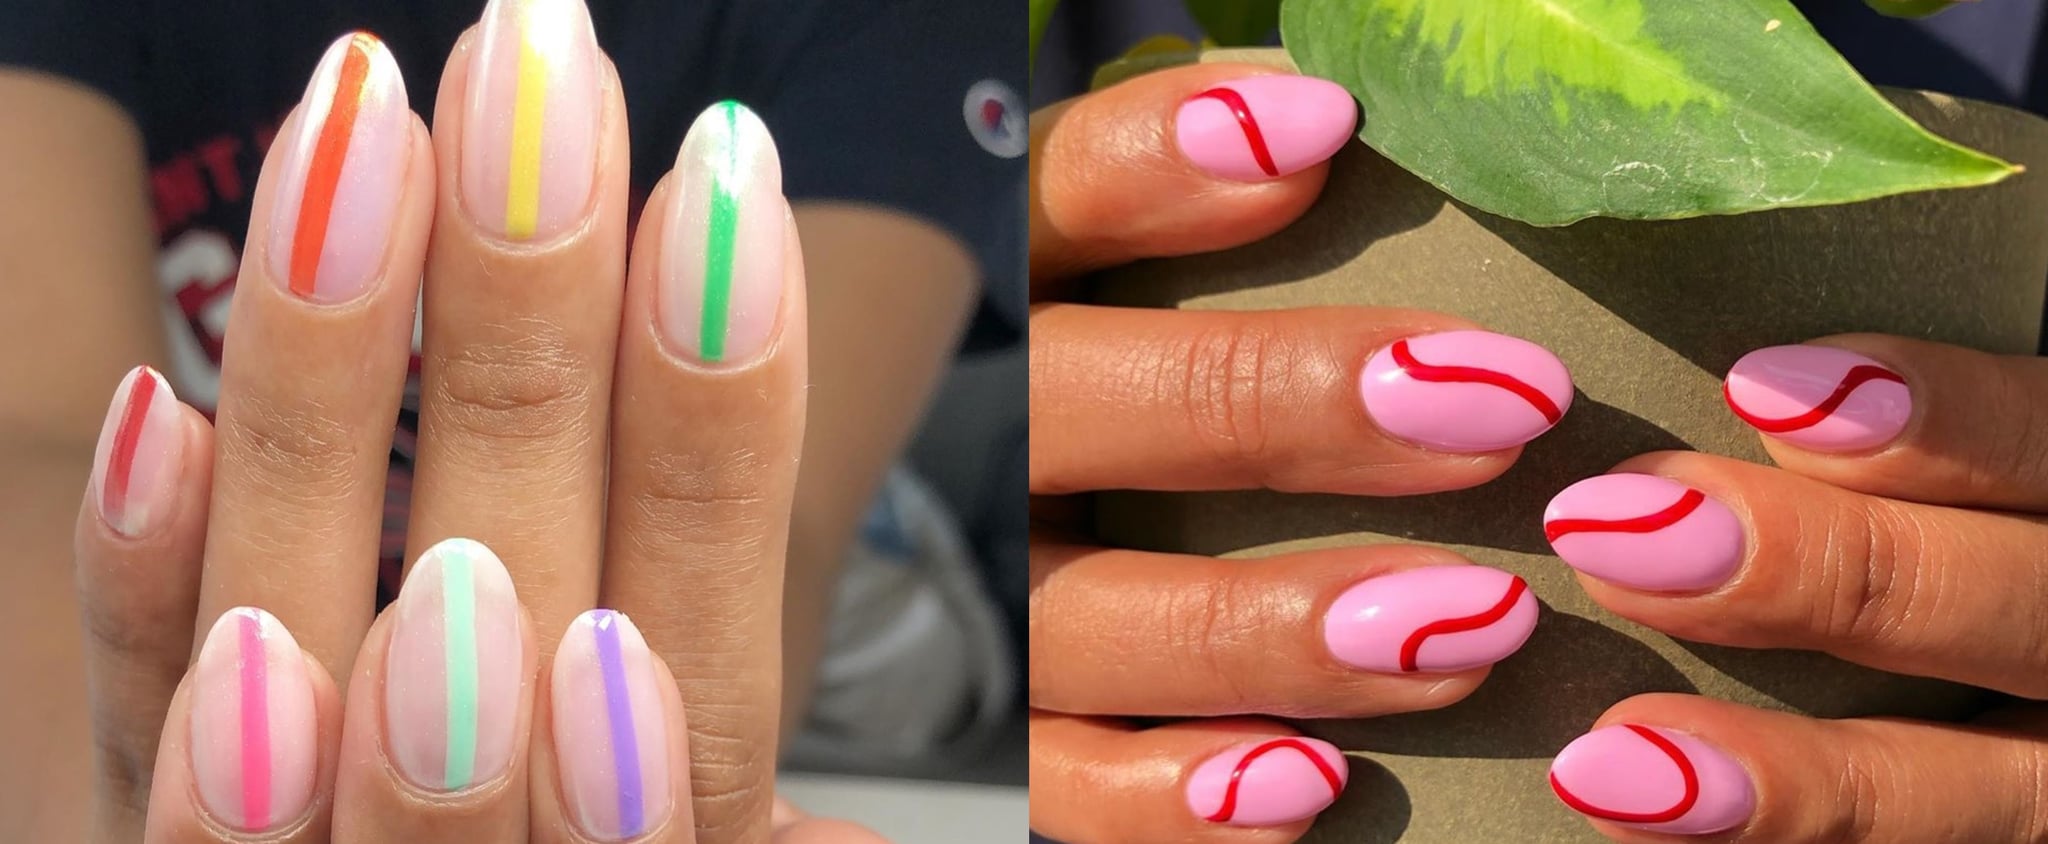 4. Minimalist Nail Design with Lines - wide 1